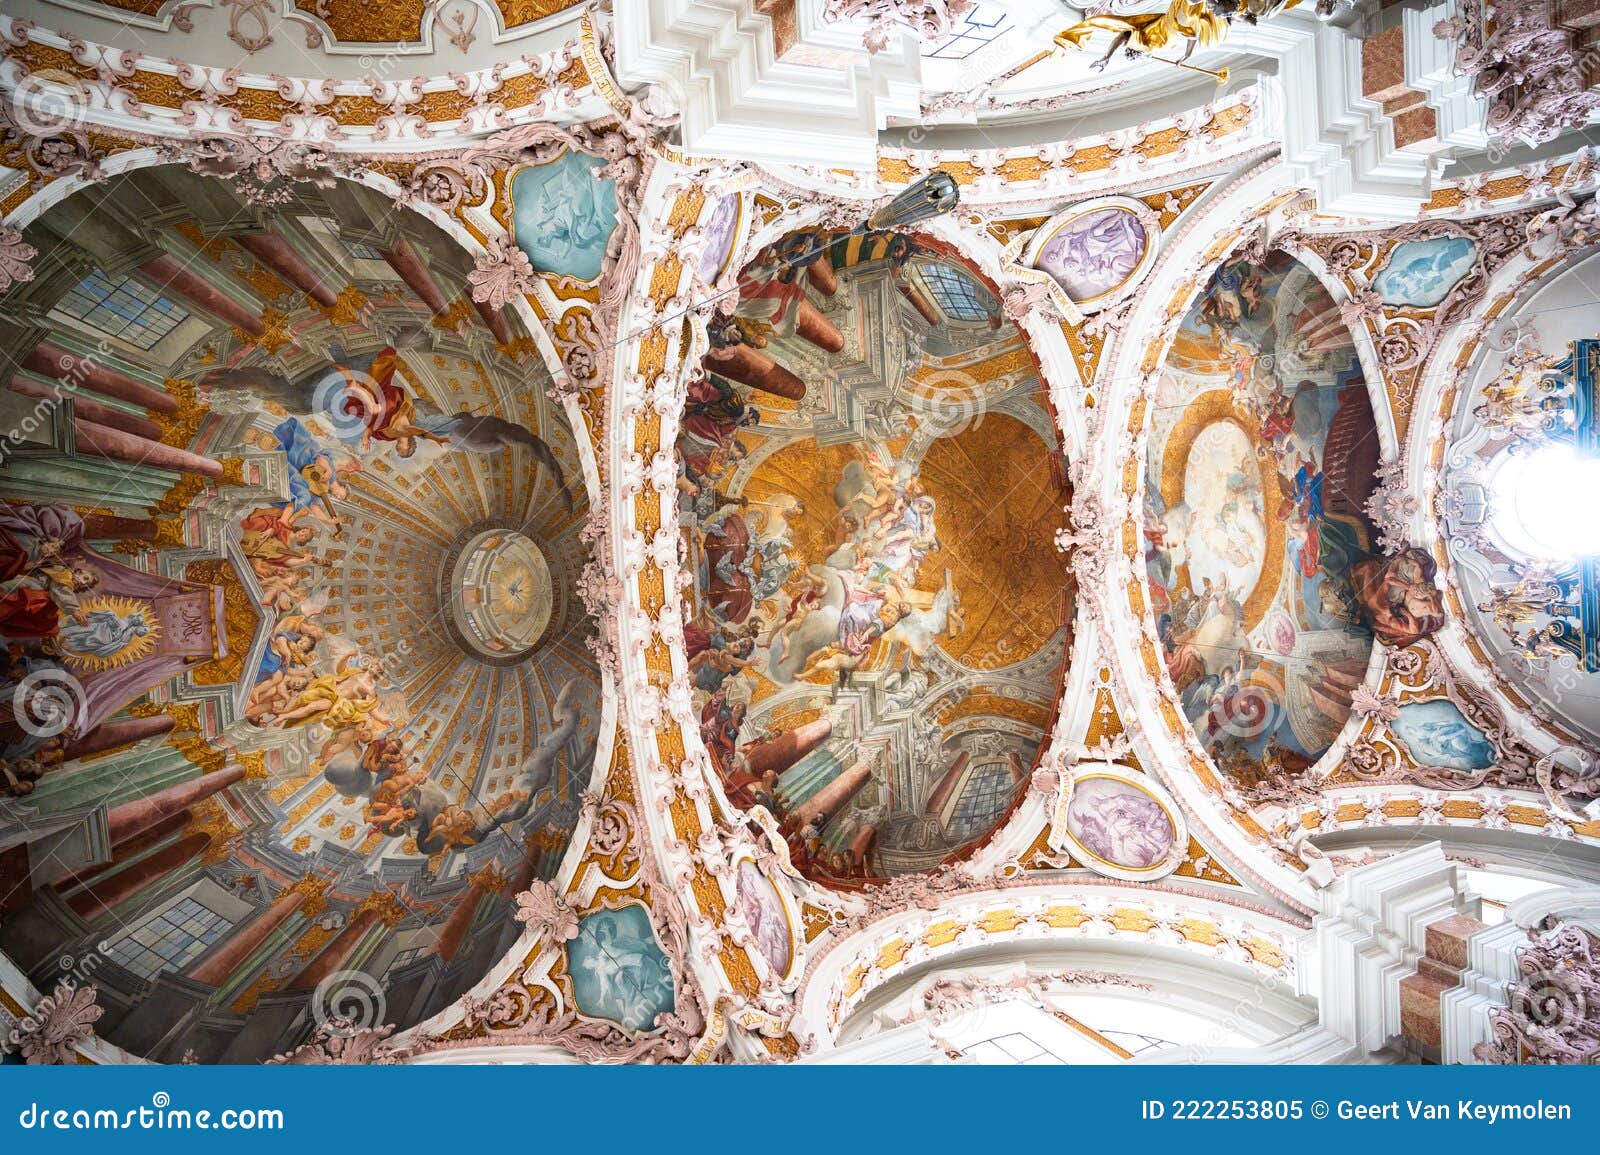 beautiful frescos painted by cosmas damian asam in innsbruck cathedral